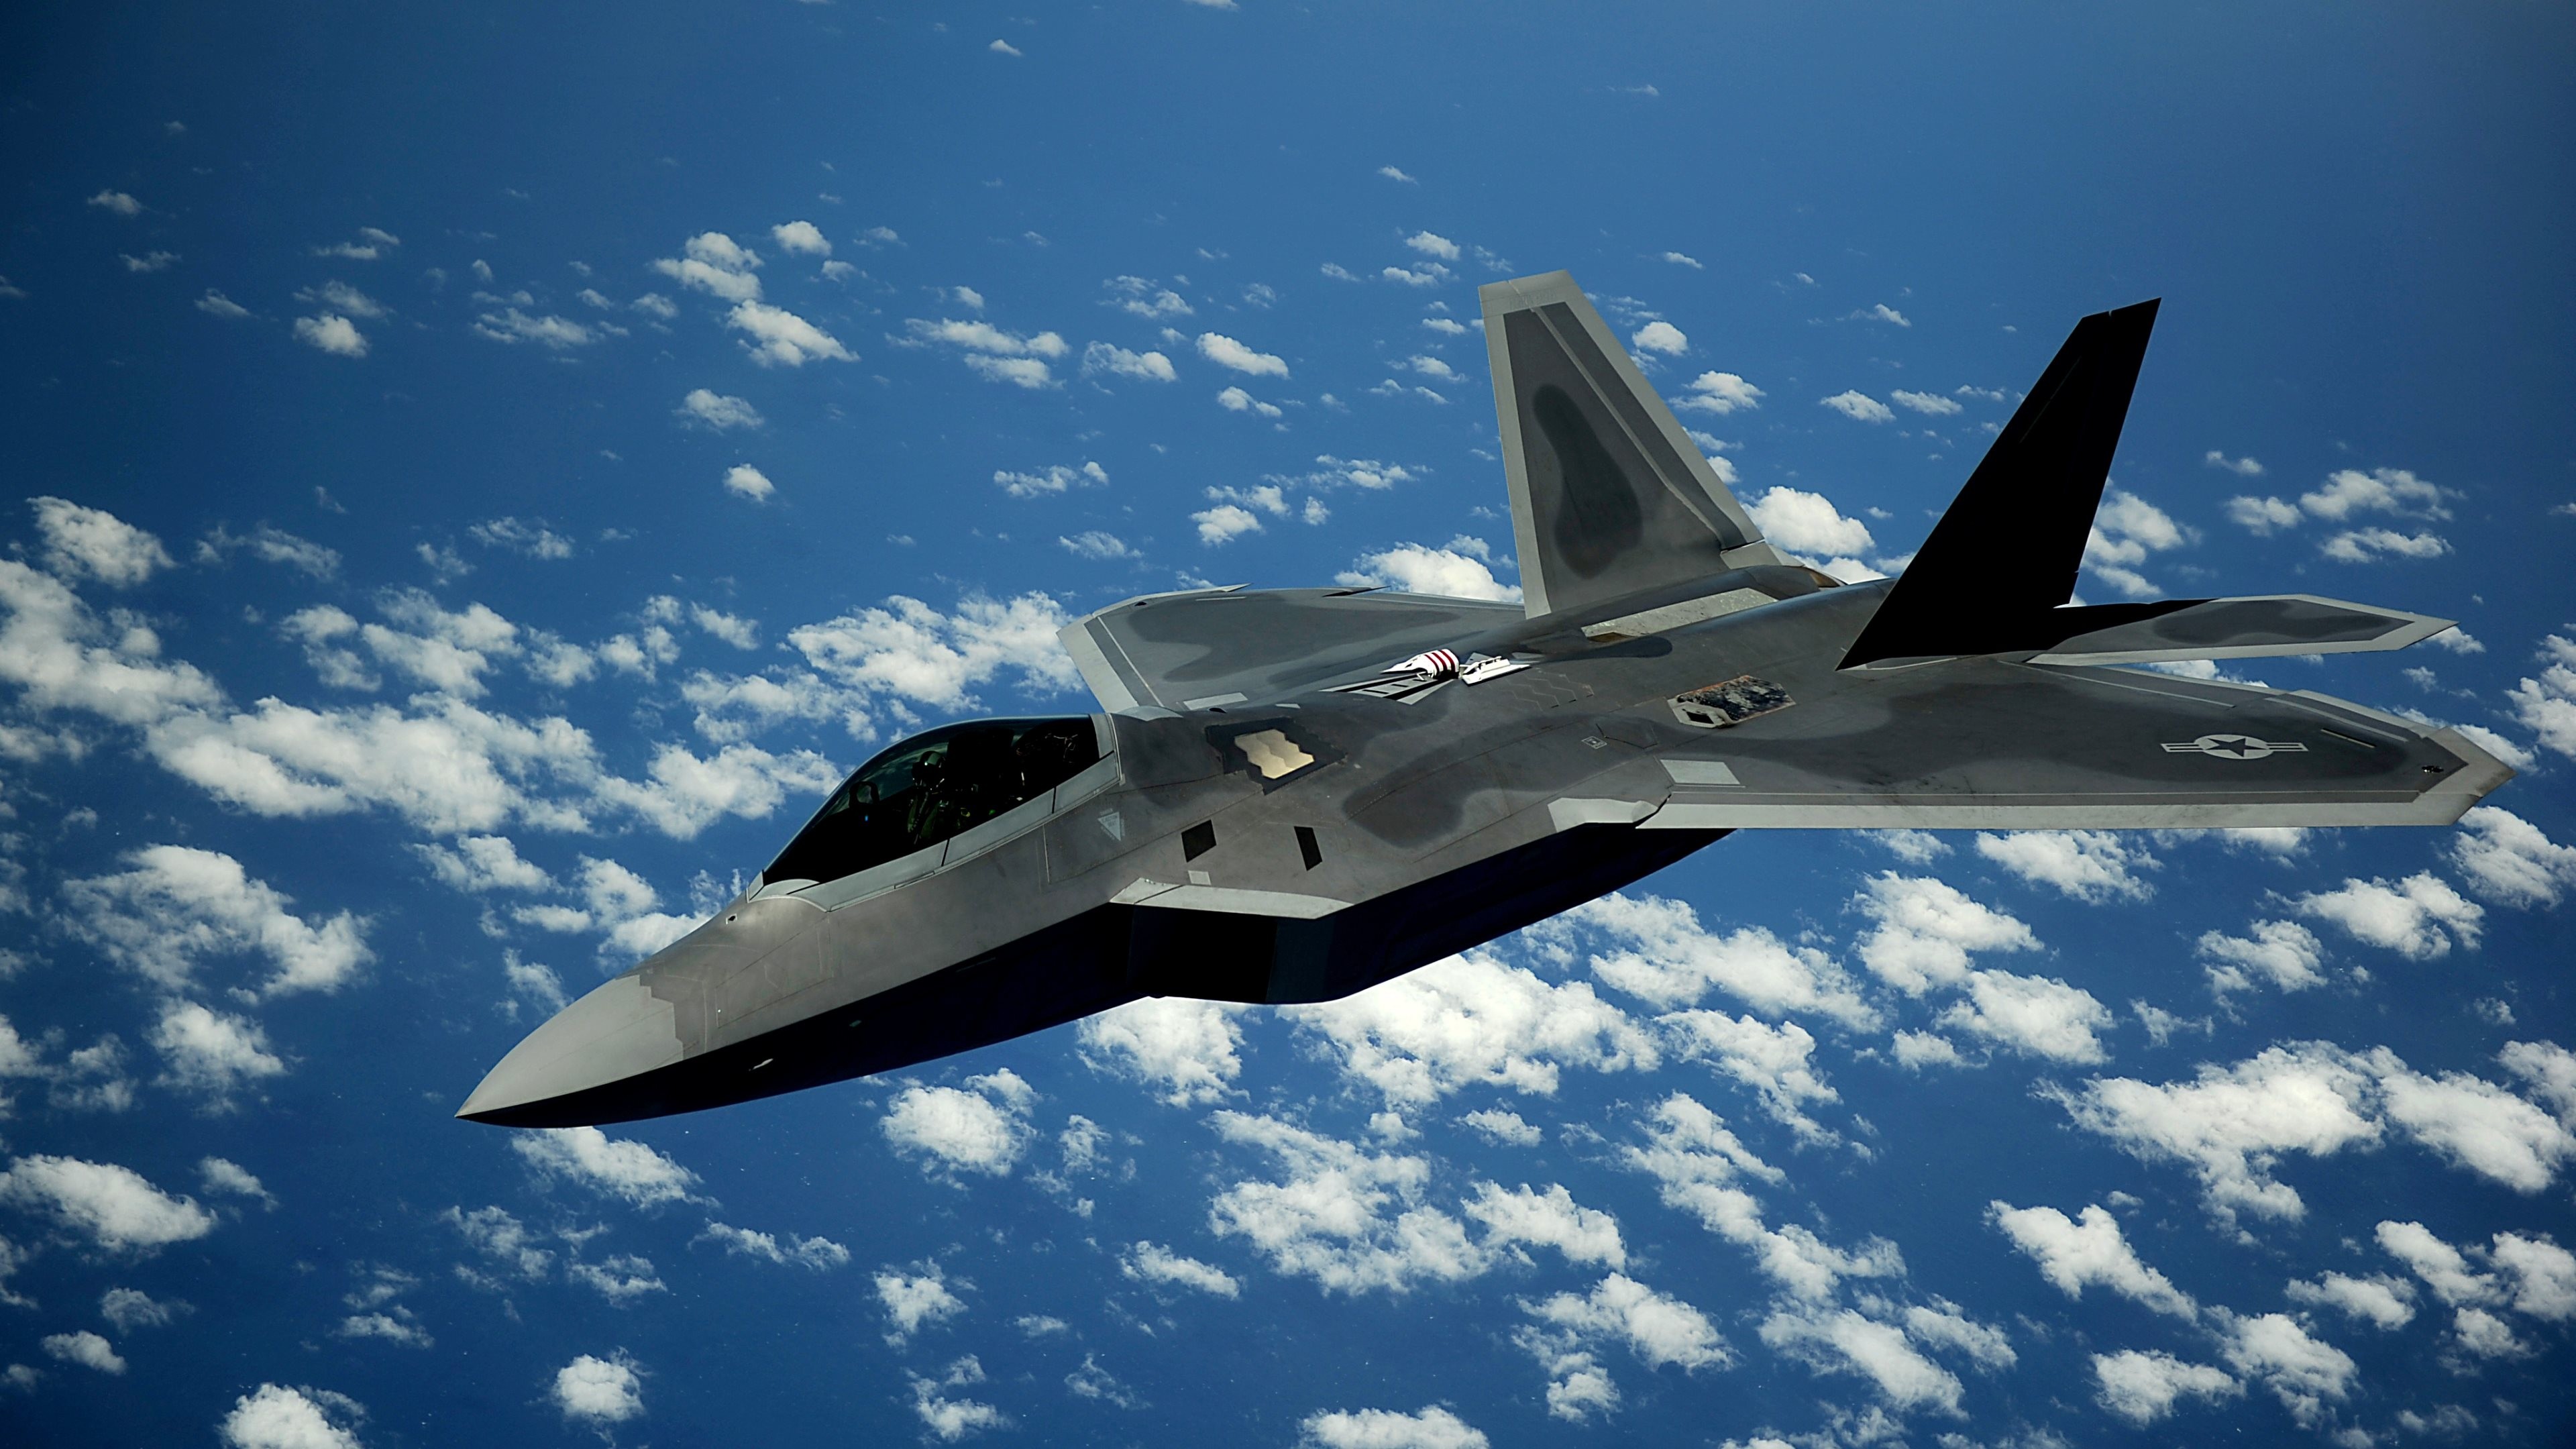 3840x2160 22 Raptor Fighter Aircraft HD Wallpapers 4K Wallpapers 